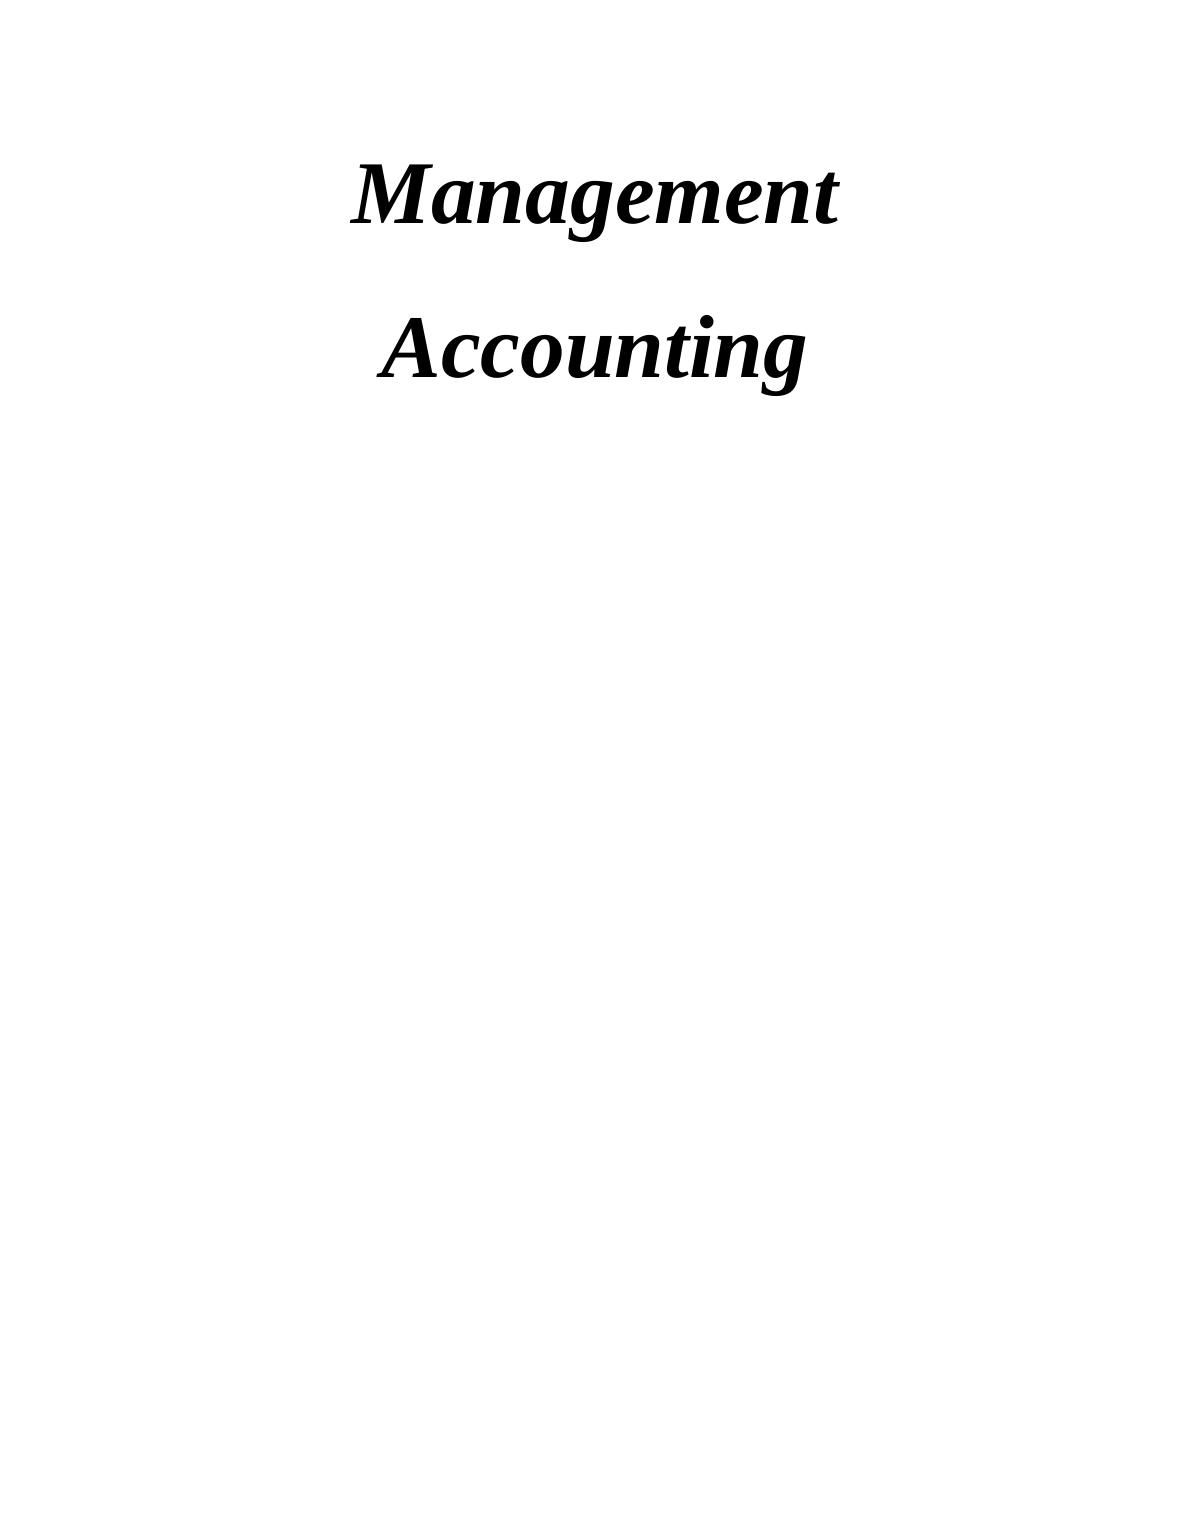 Management Accounting and Different Types of Management Accounting System_1